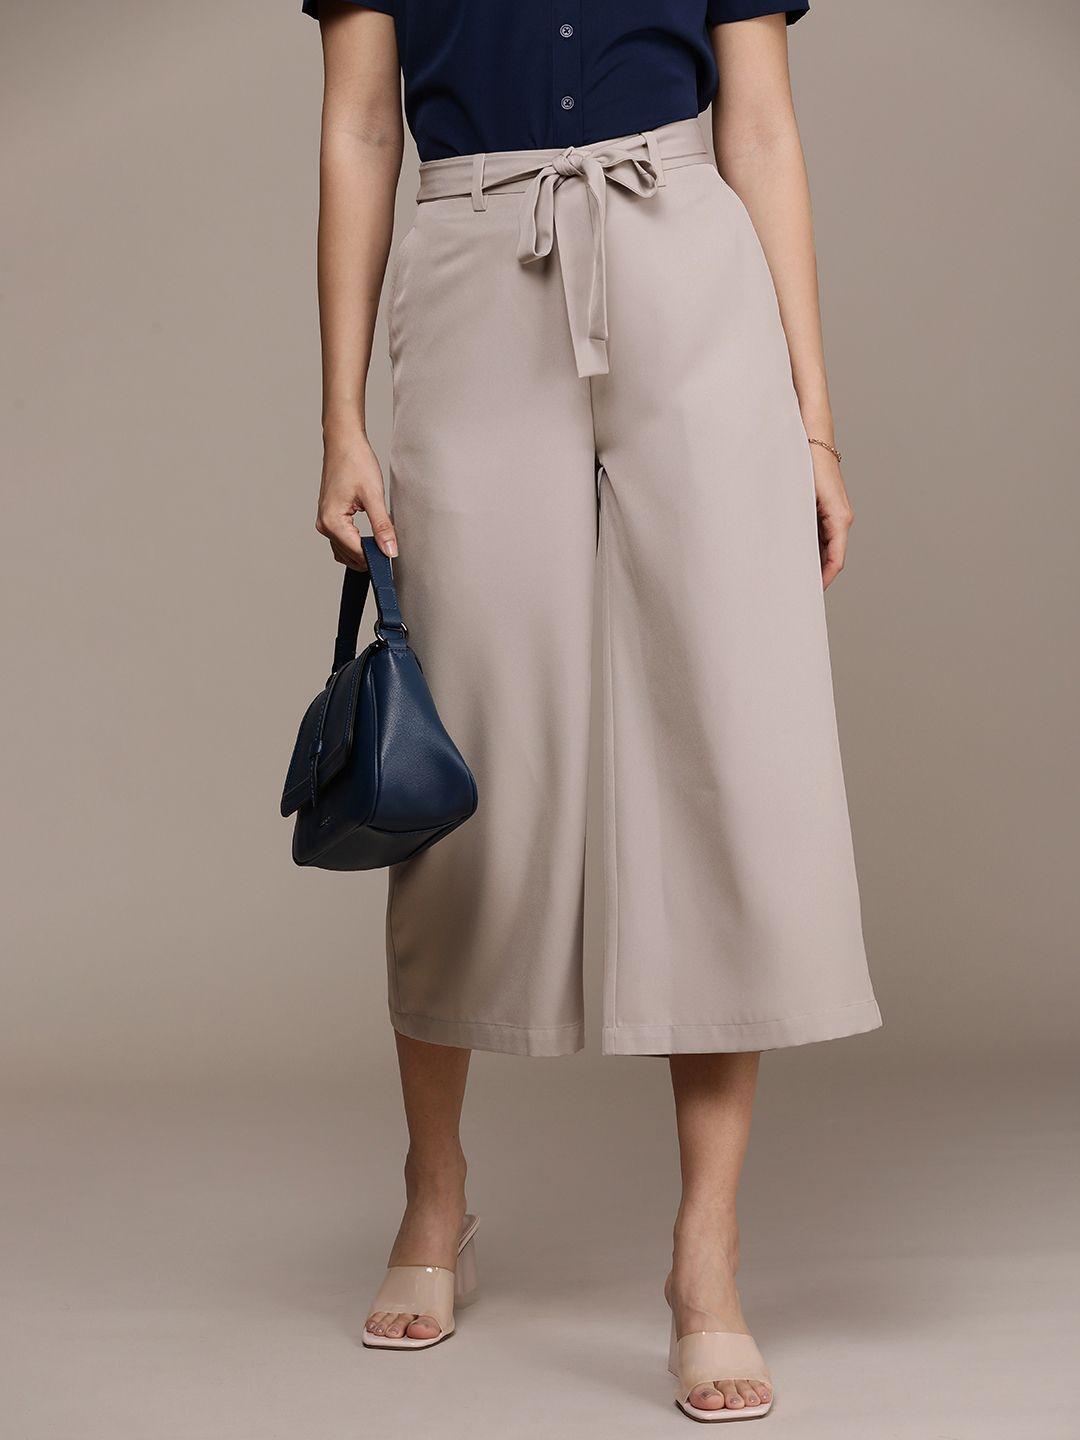 french connection women culottes trousers comes with a belt